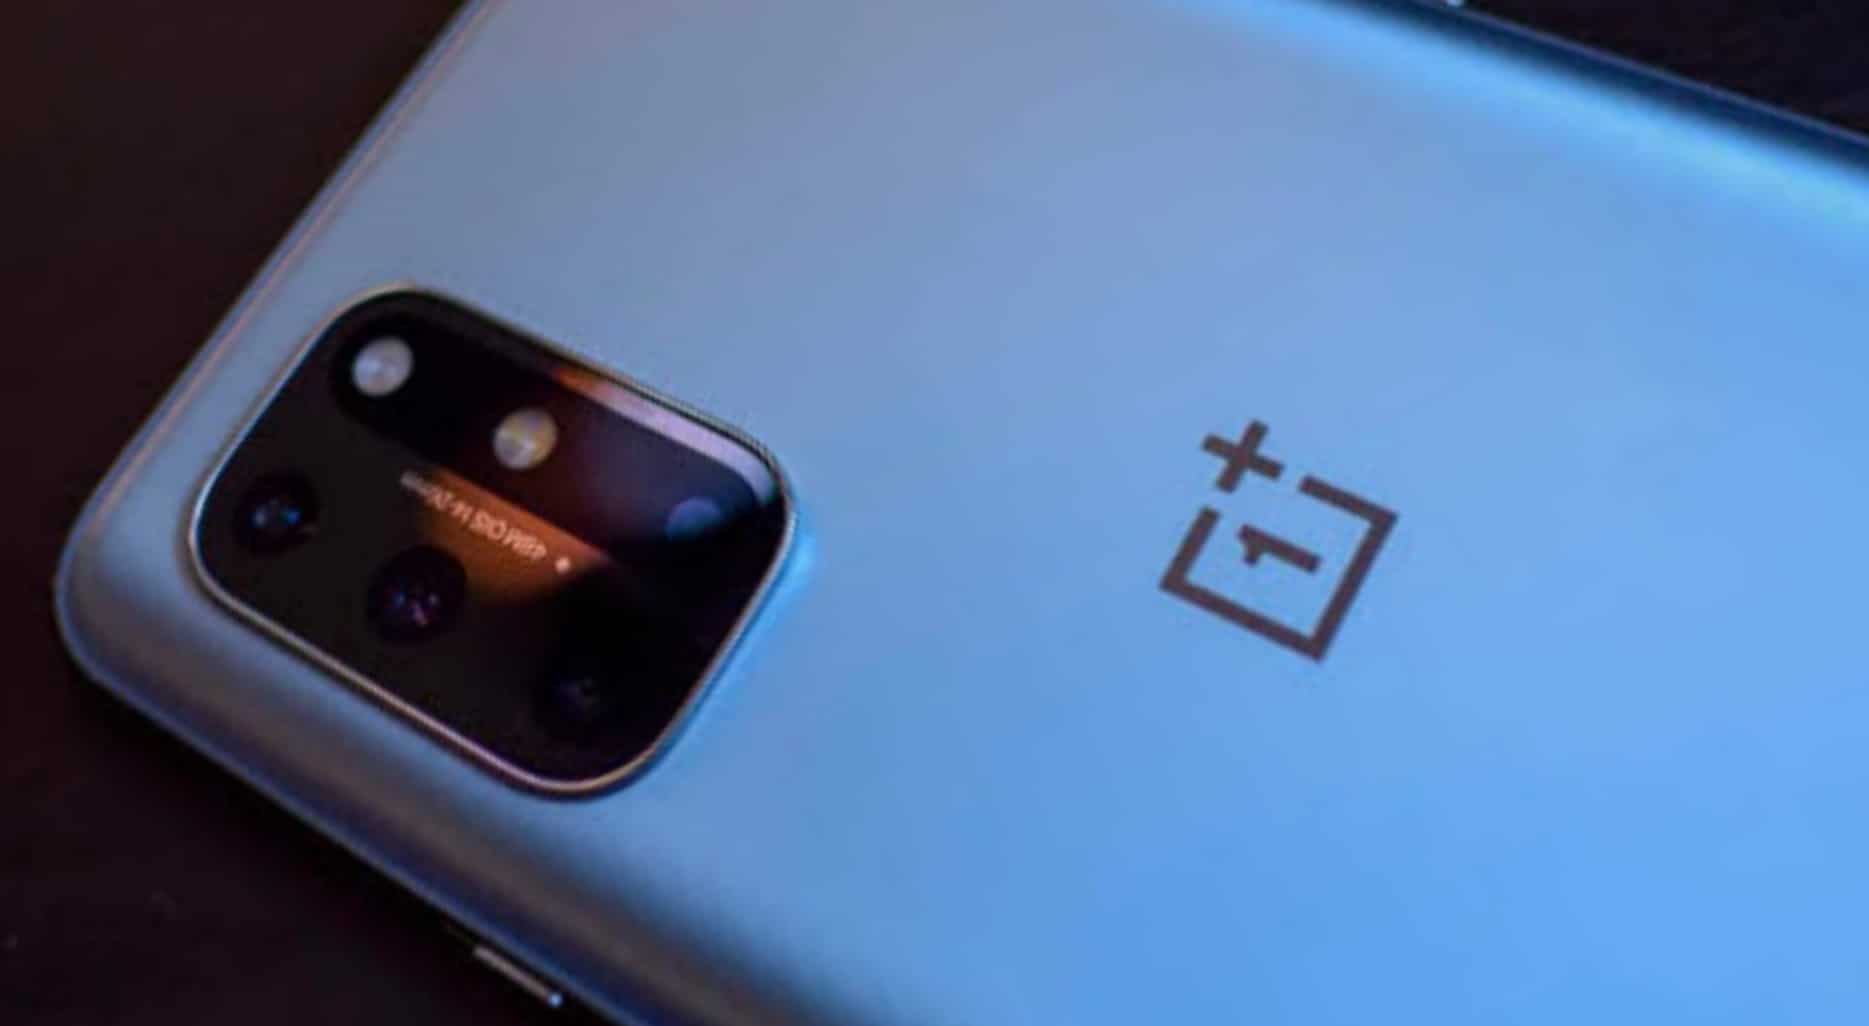 OnePlus 9 Lite Tipped to Launch in India, China With Snapdragon 865 SoC